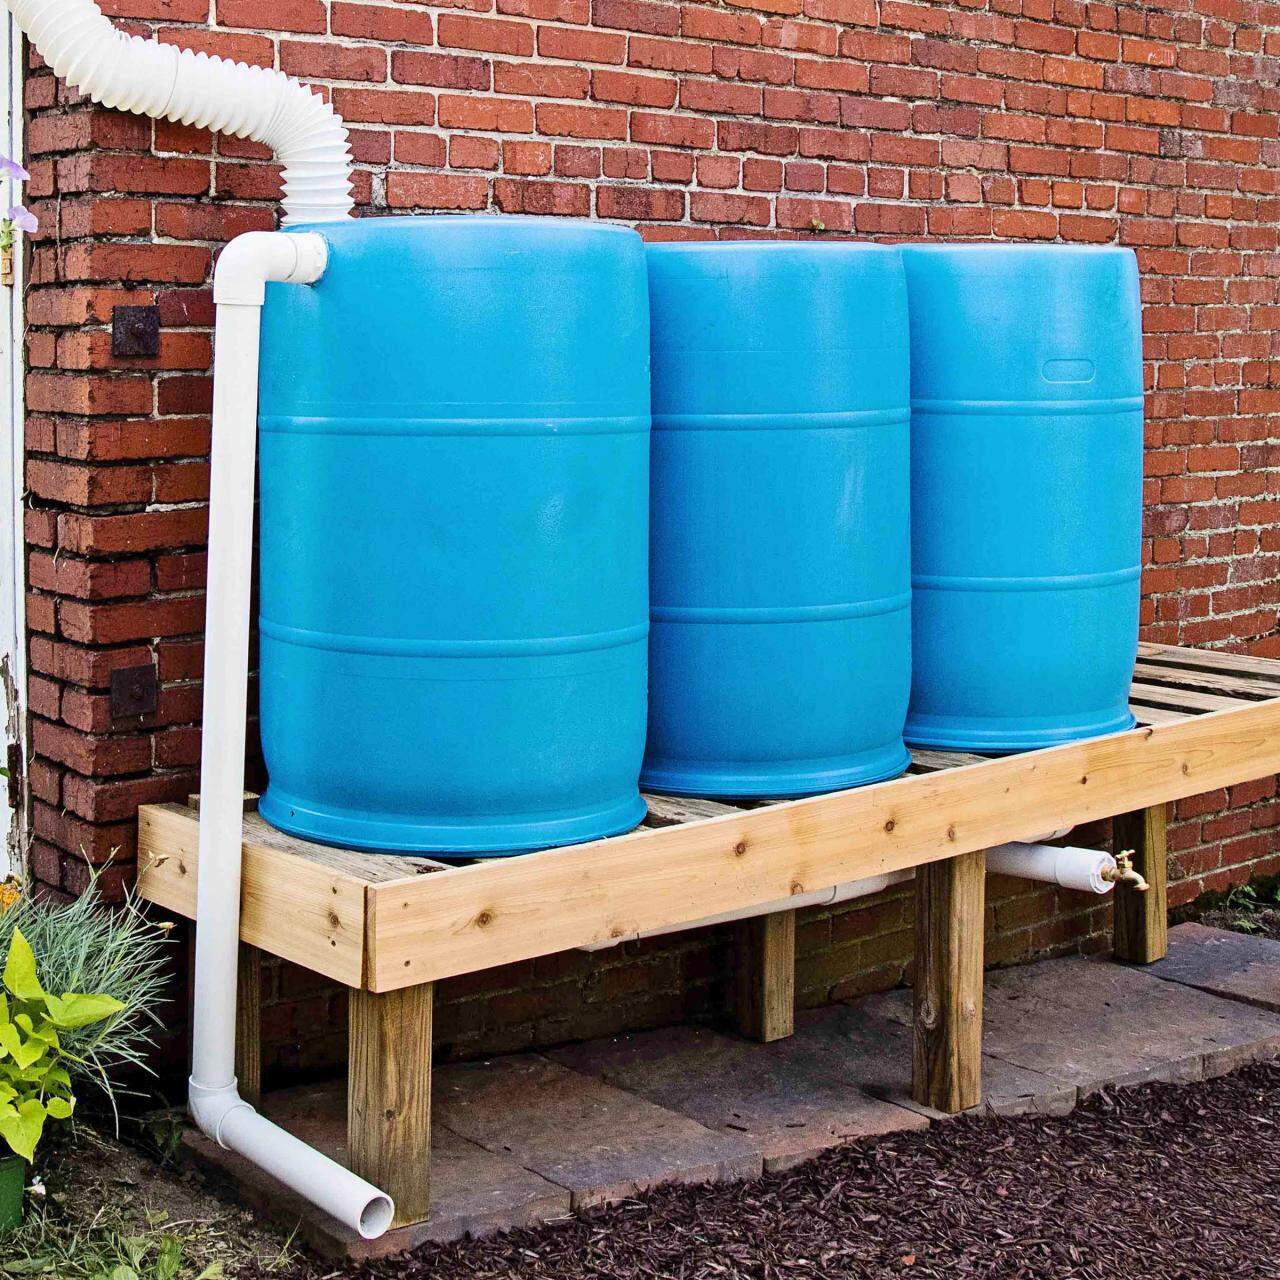 How To Store Rain Water At Home